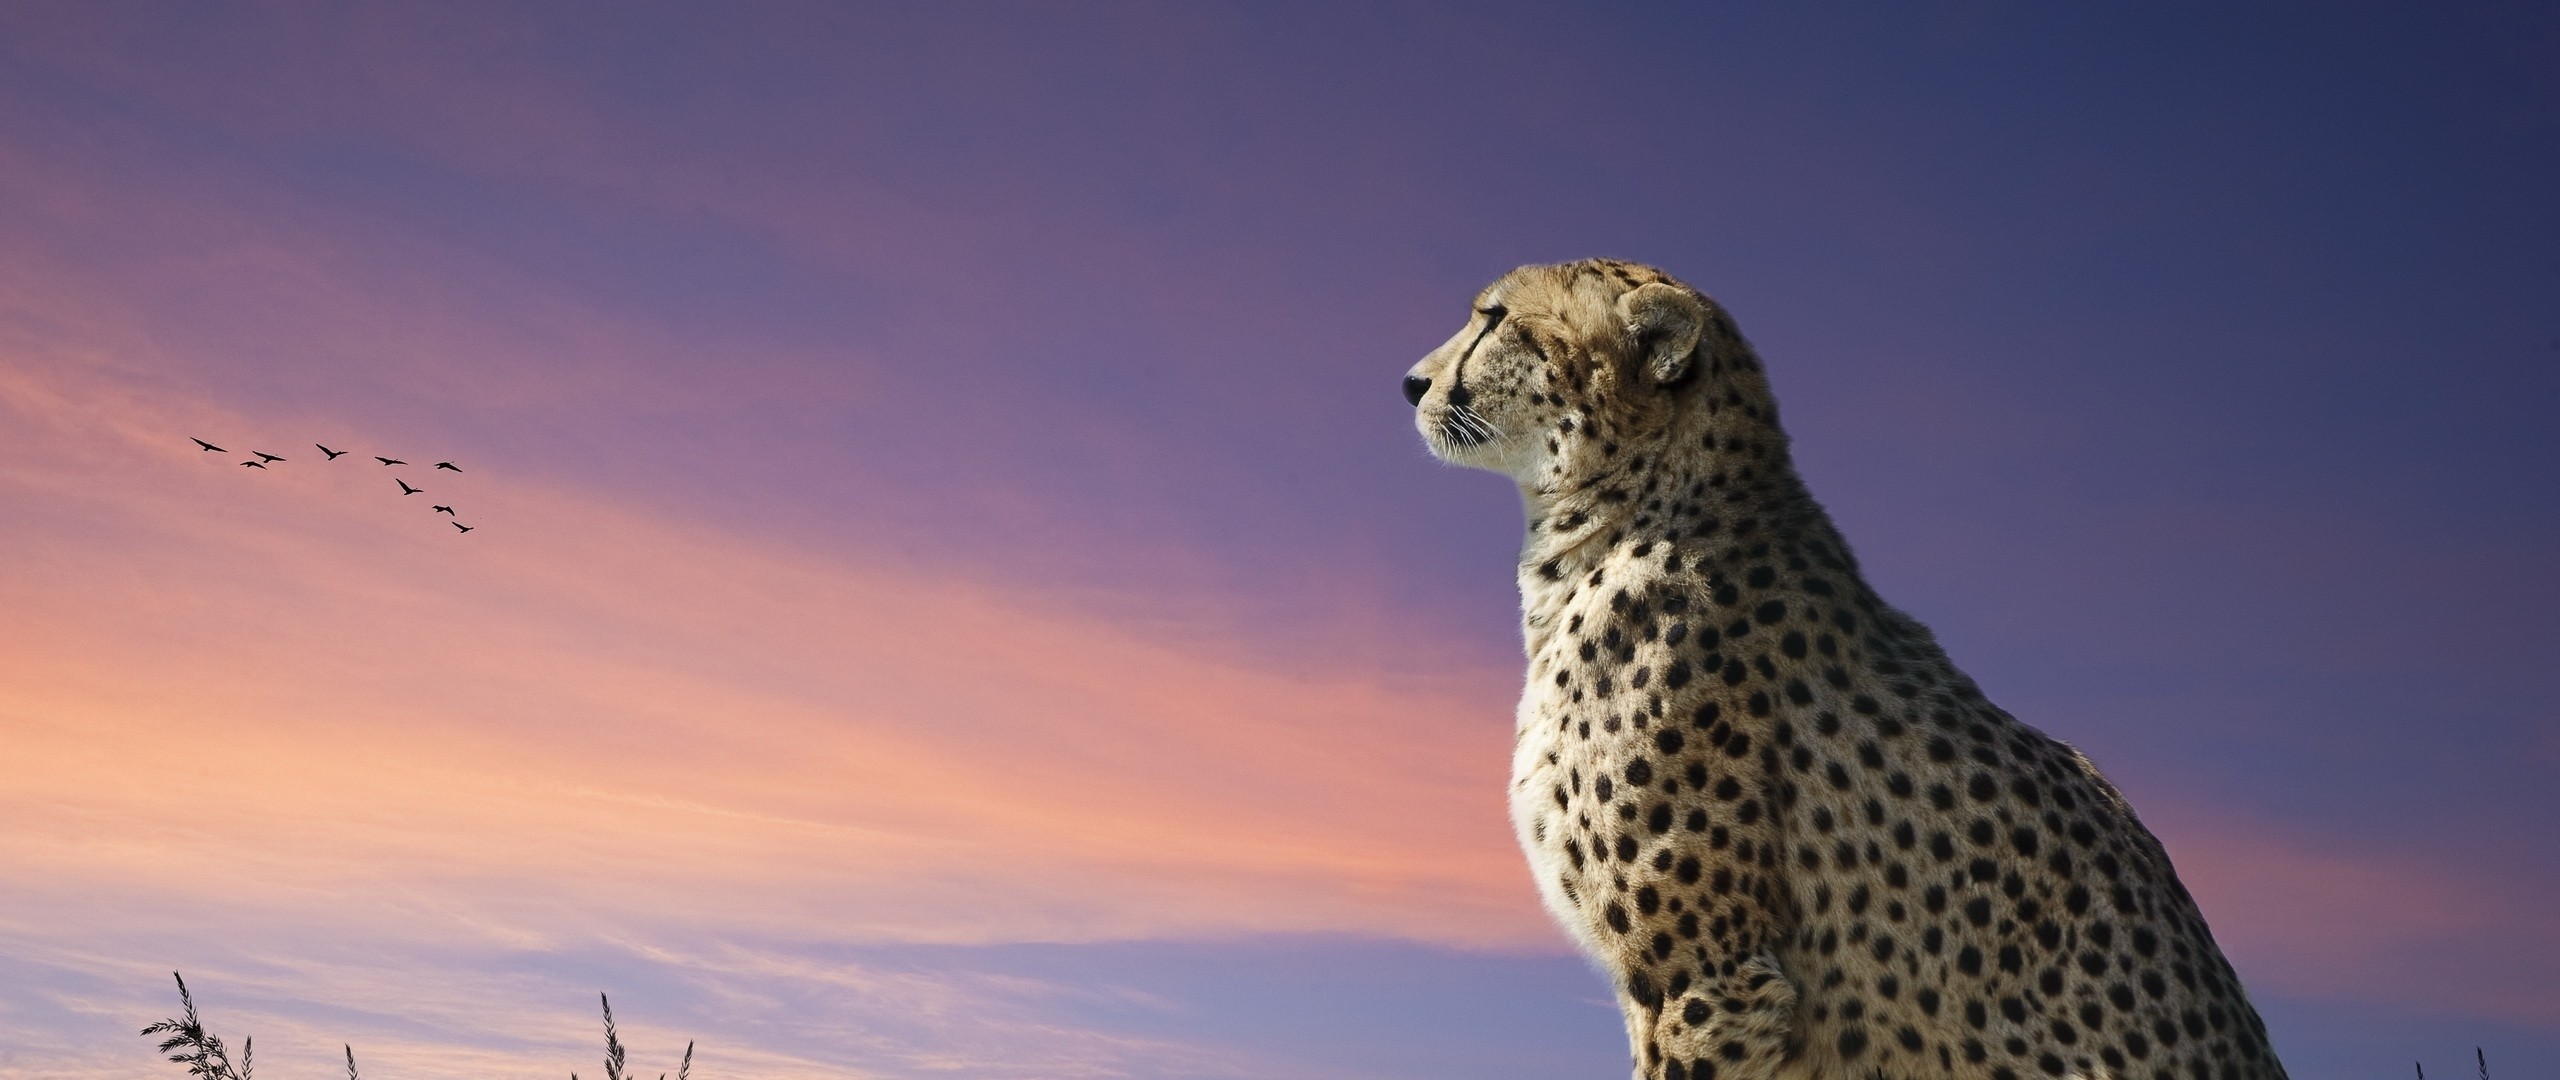 2560x1080 Cheetah Backgrounds Image Wallpaper Cave